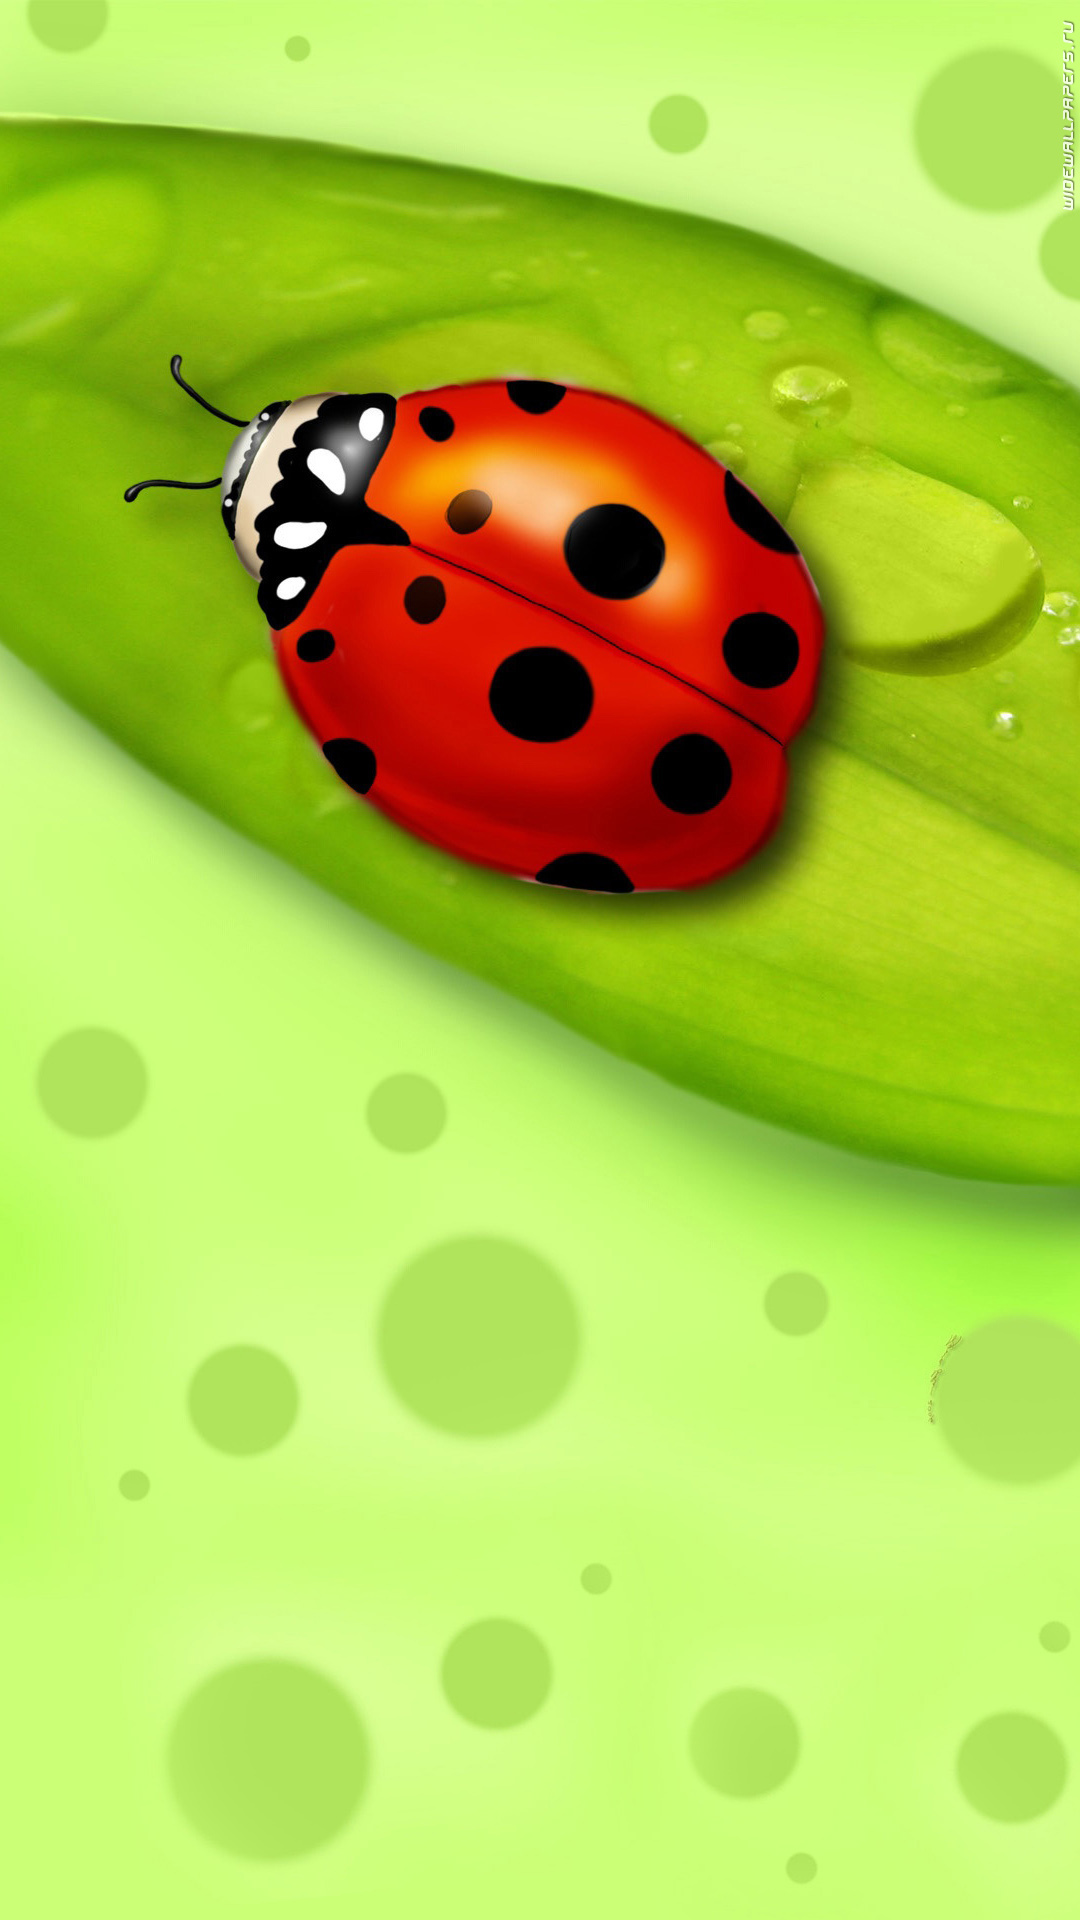 pictures, insects, ladybugs, green 4K